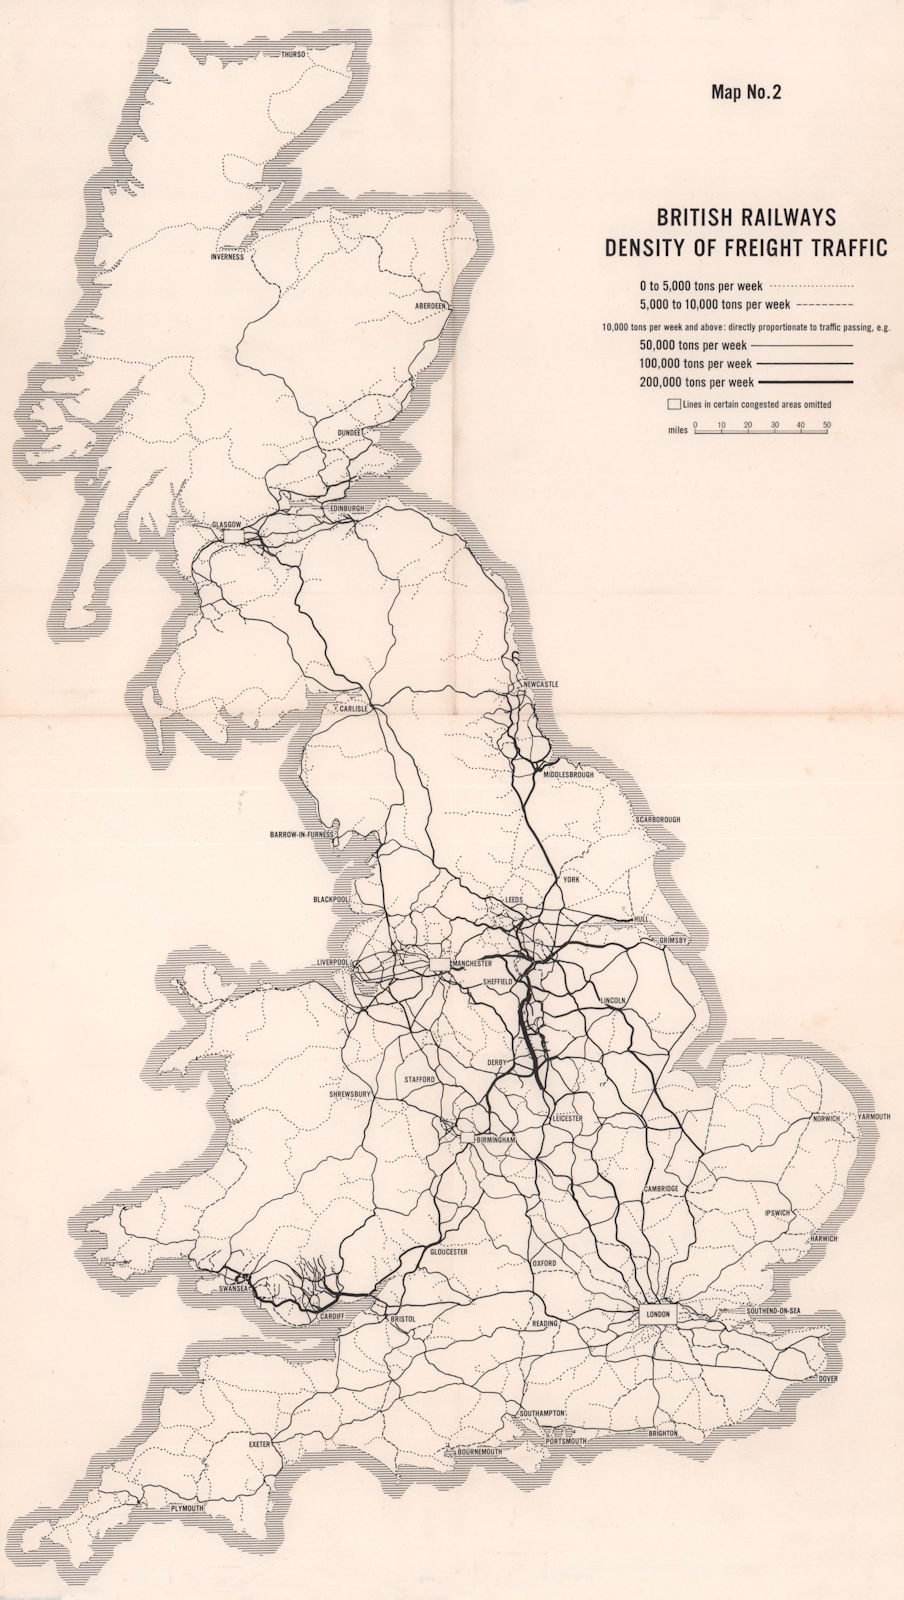 Associate Product British Railways density of freight traffic. BEECHING REPORT 1963 old map